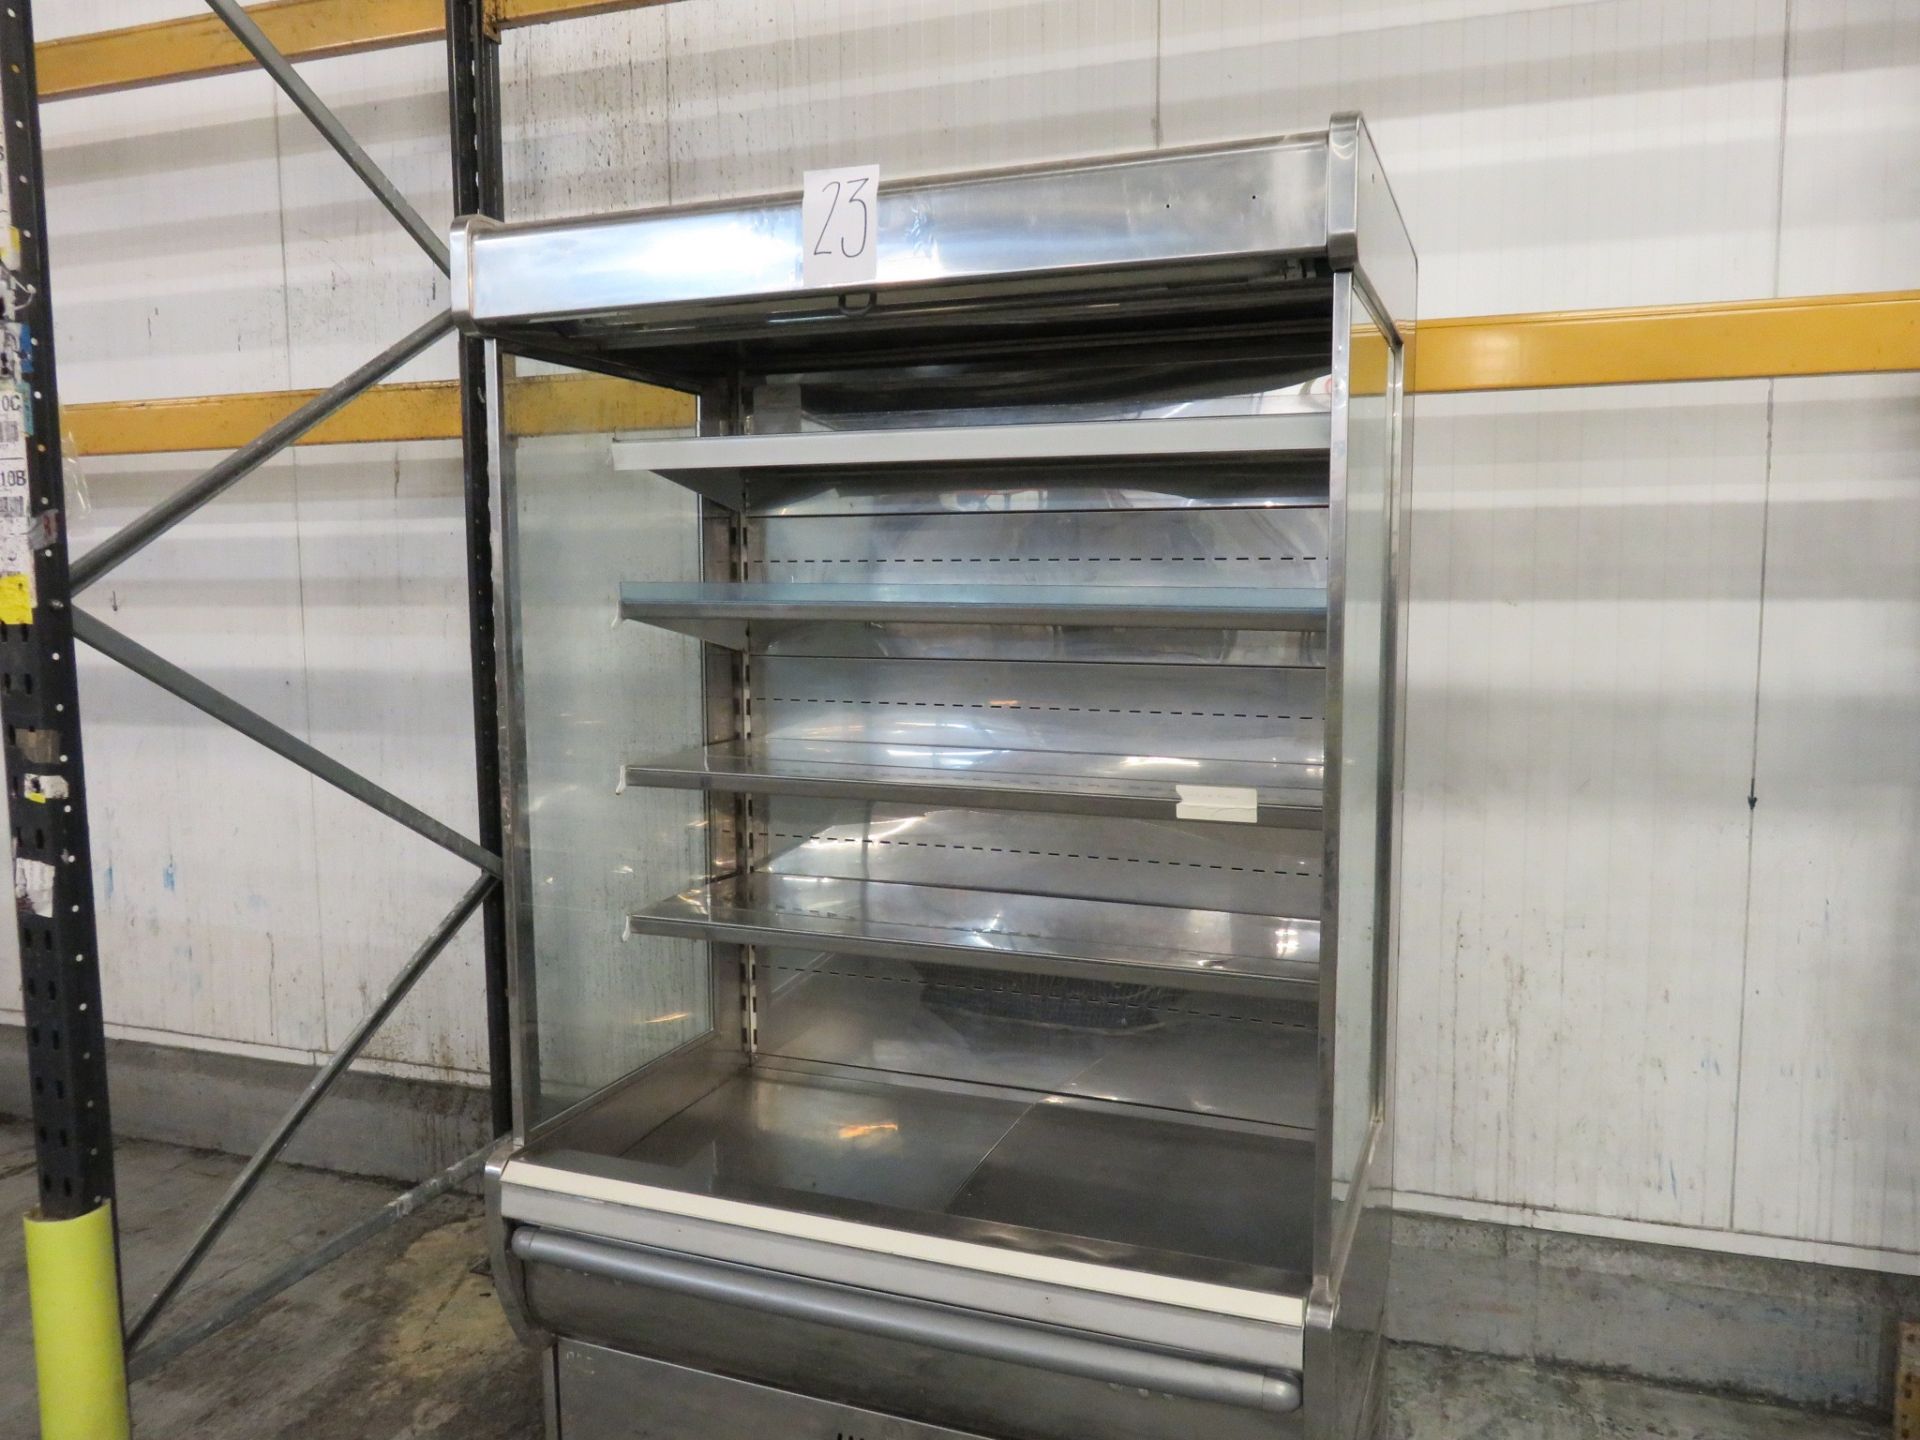 S/s refrigerated Display Cabinet. Approx. 1200mm x 850mm x 2 mtr high. LIFT OUT £20 - Image 2 of 2